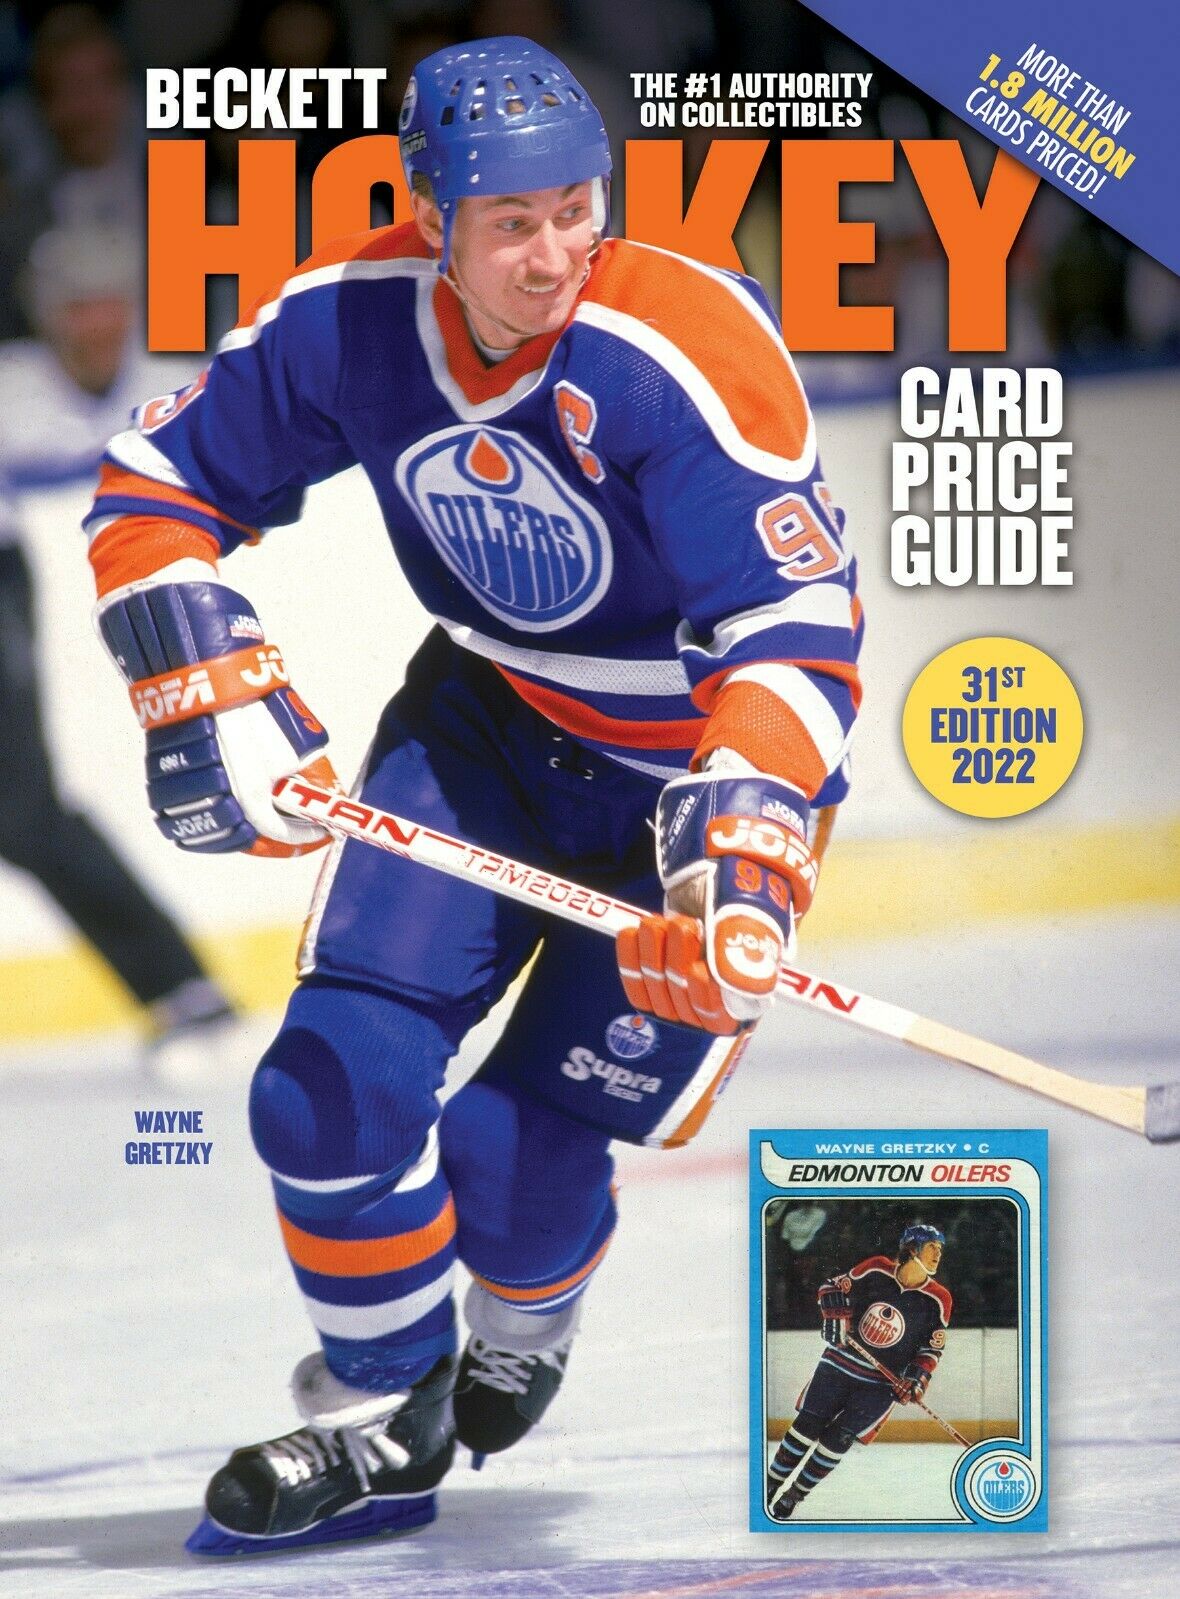 2022 Beckett Hockey Card Annual Price Guide 31st Edition with Wayne Gretzky - Miraj Trading